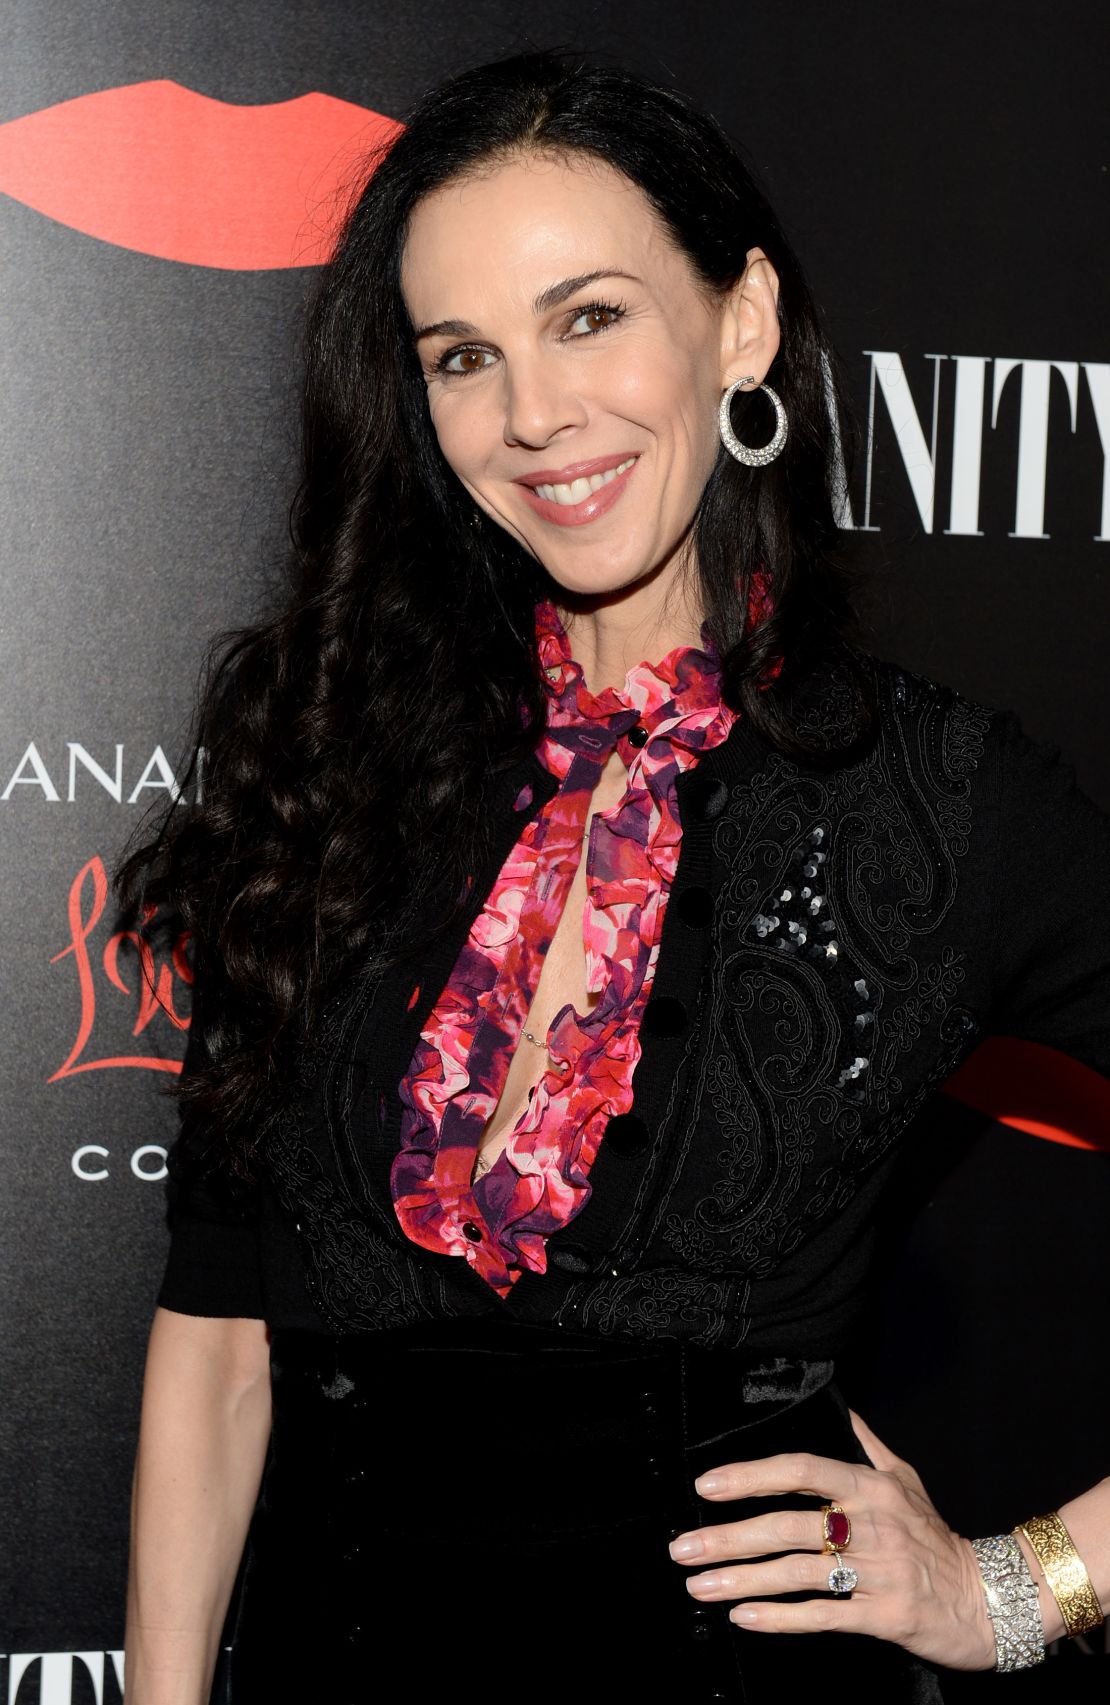 Fashion designer L'Wren Scott died in March.  She and Mick Jagger had been in a relationship since 2003.